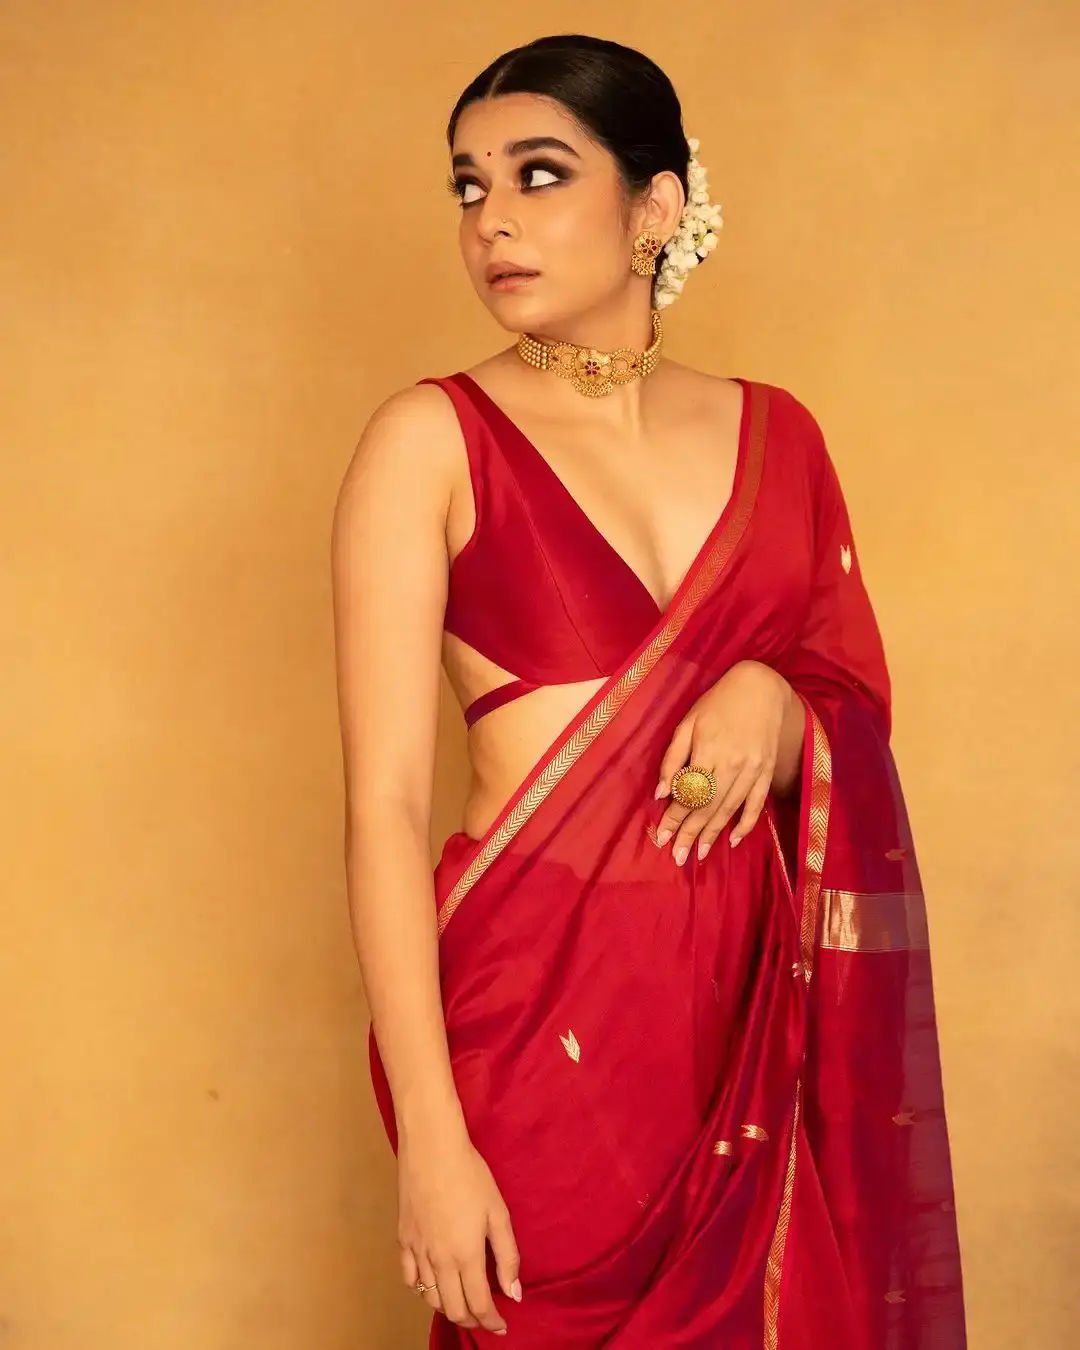 INDIAN ACTRESS MITHILA PALKAR IN TRADITIONAL RED COLOR SAREE SLEEVELESS BLOUSE 2